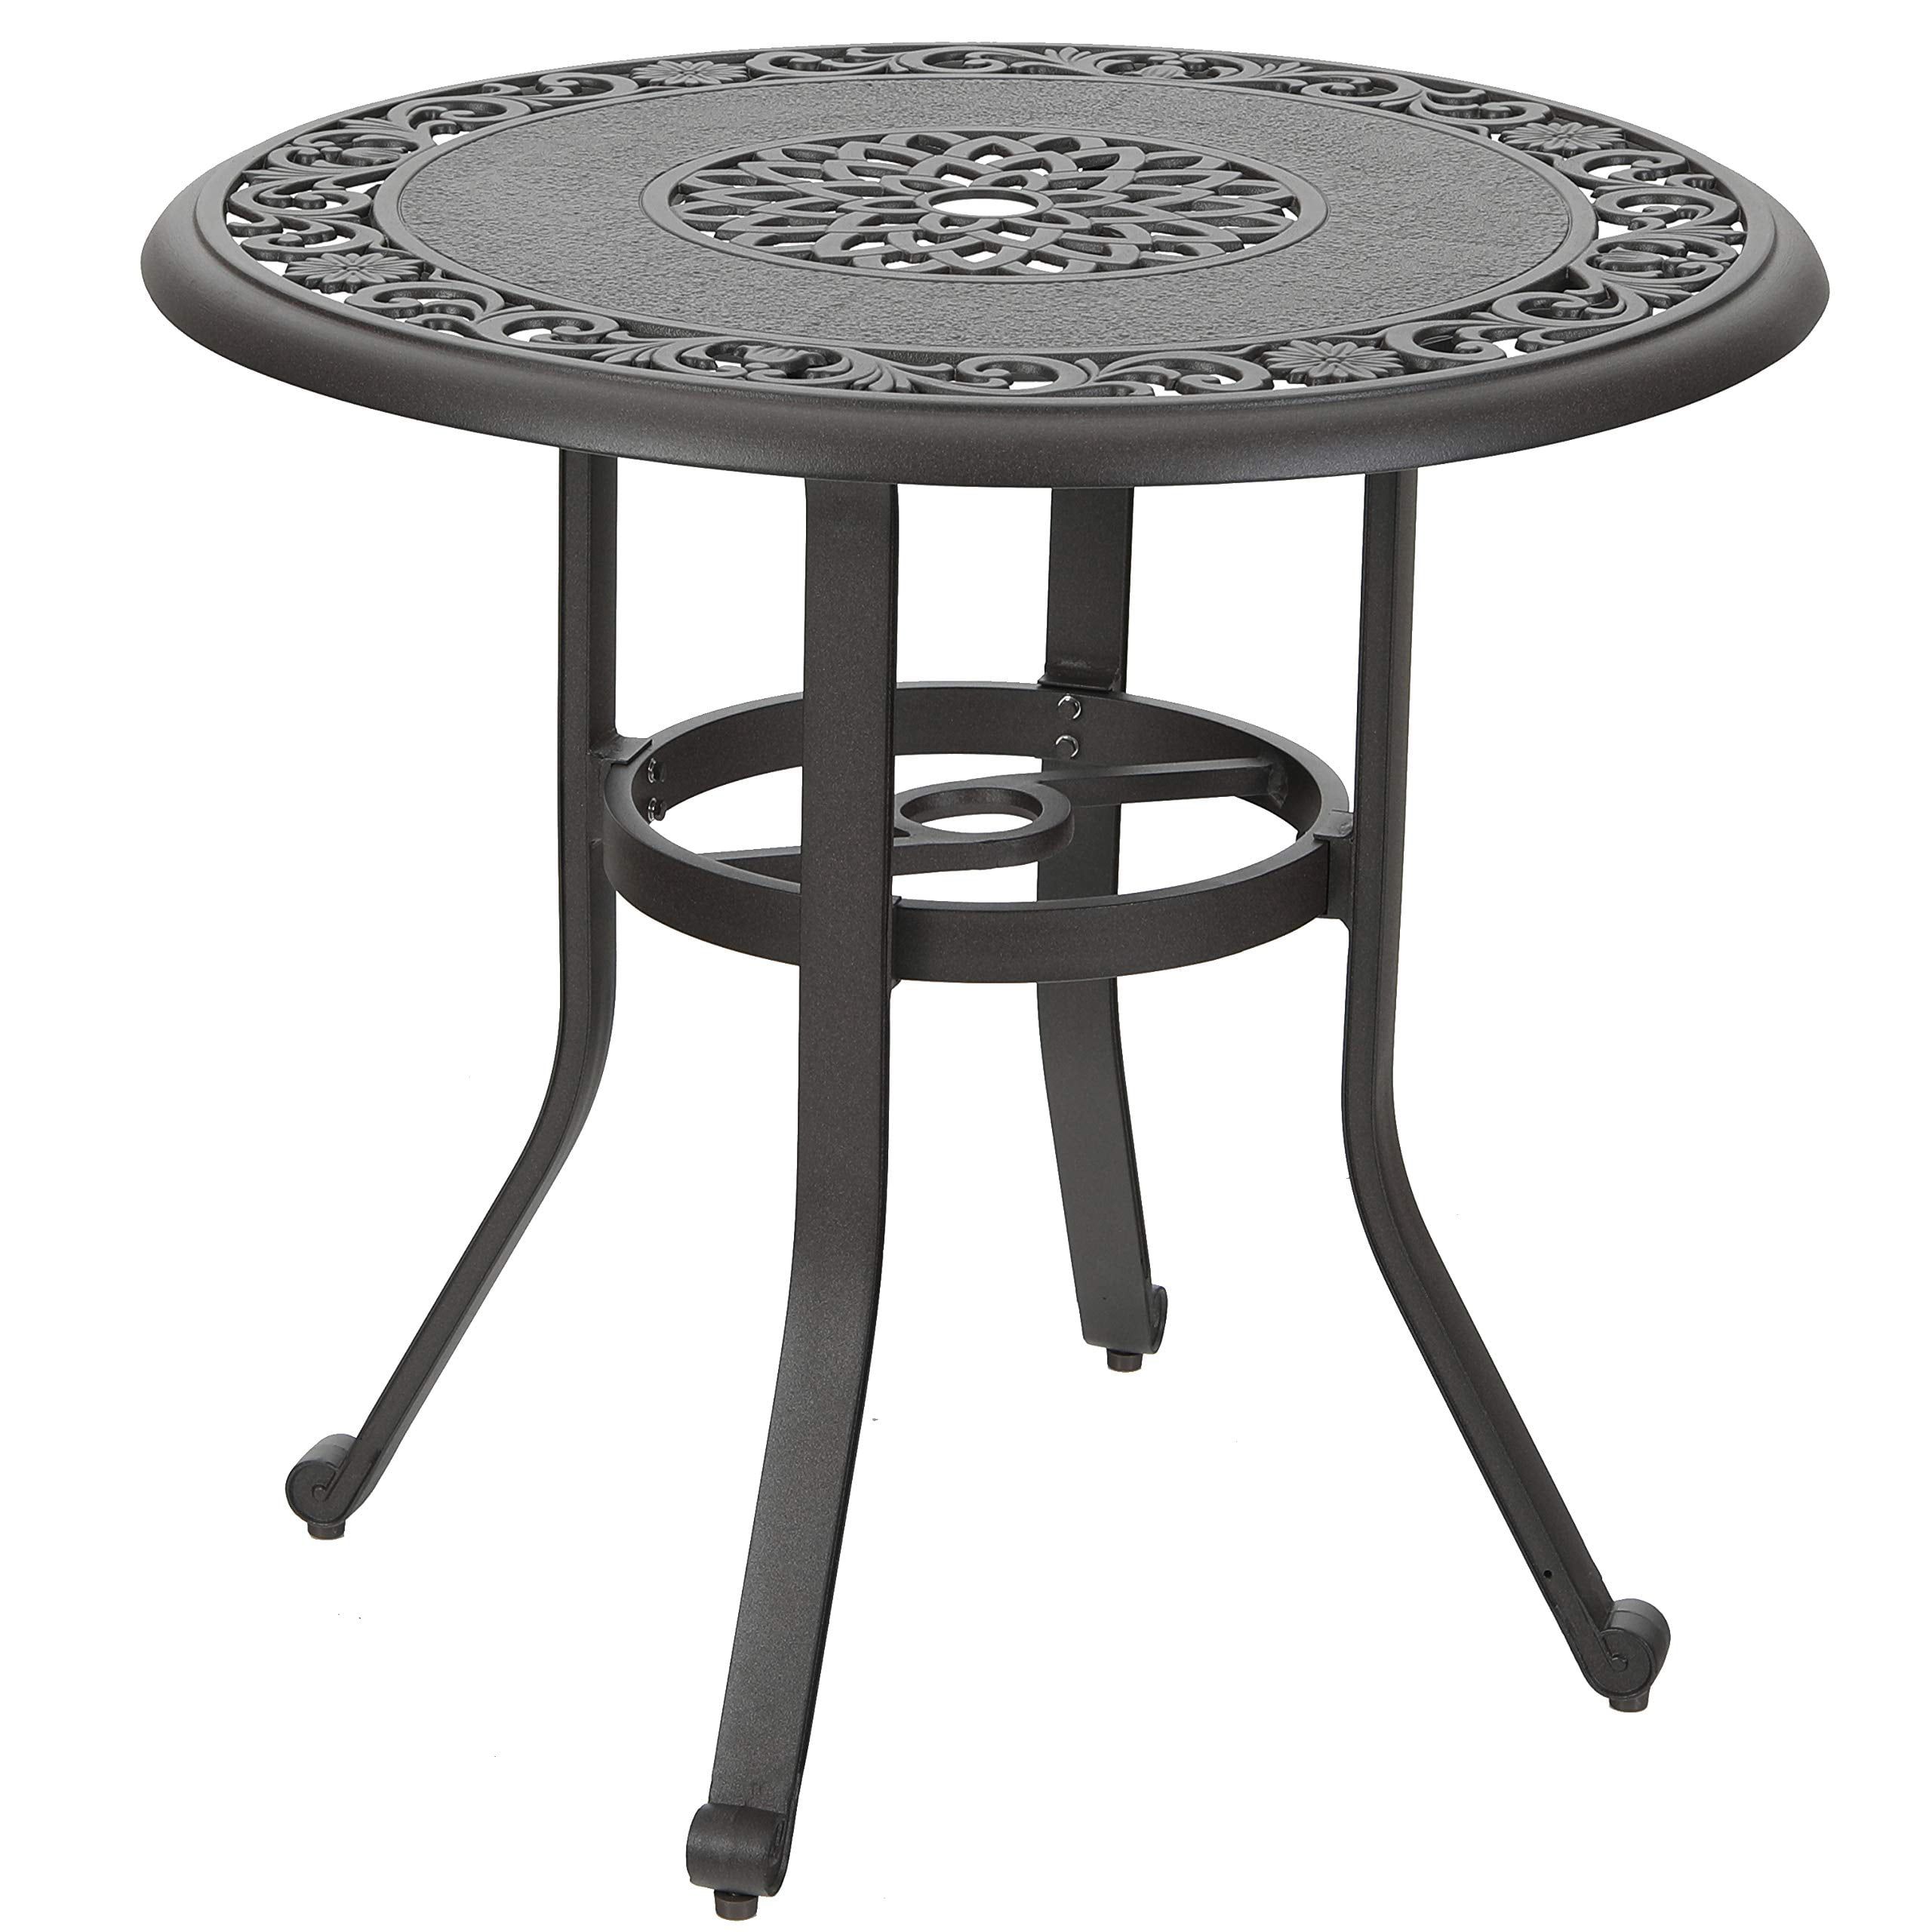 Mf Studio 32" Cast Aluminum Patio Outdoor Bistro Table, Round Dining Within Round Steel Patio Coffee Tables (Gallery 6 of 20)